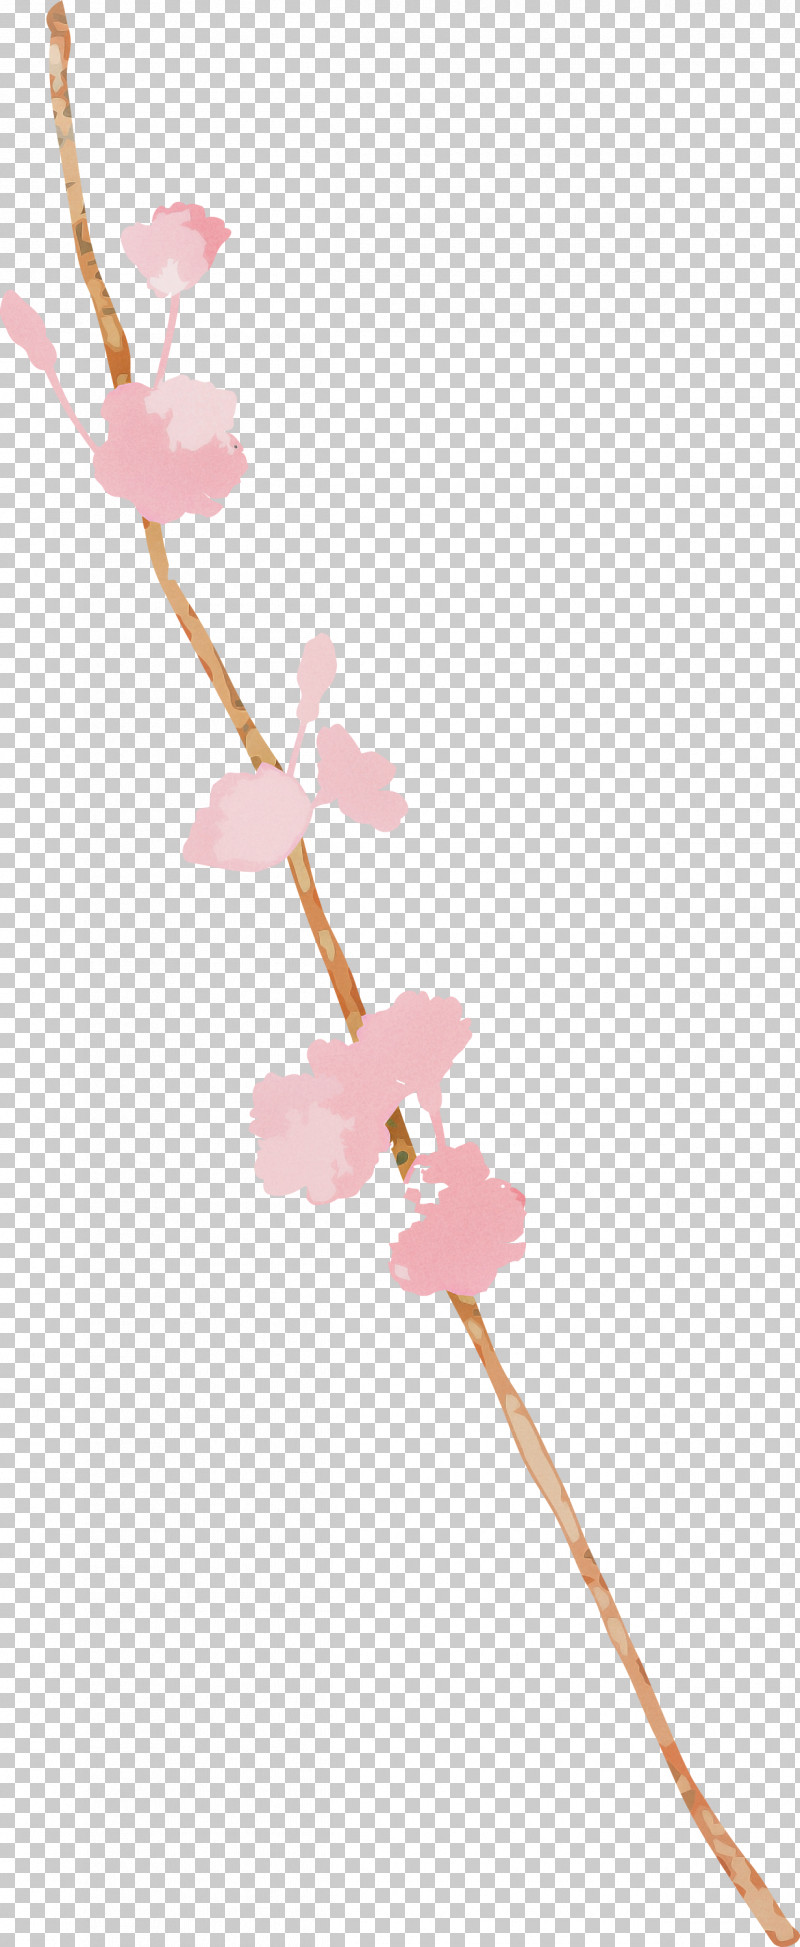 Cherry Blossom PNG, Clipart, Blossom, Cherry Blossom, Flower, Pedicel, Pink Free PNG Download